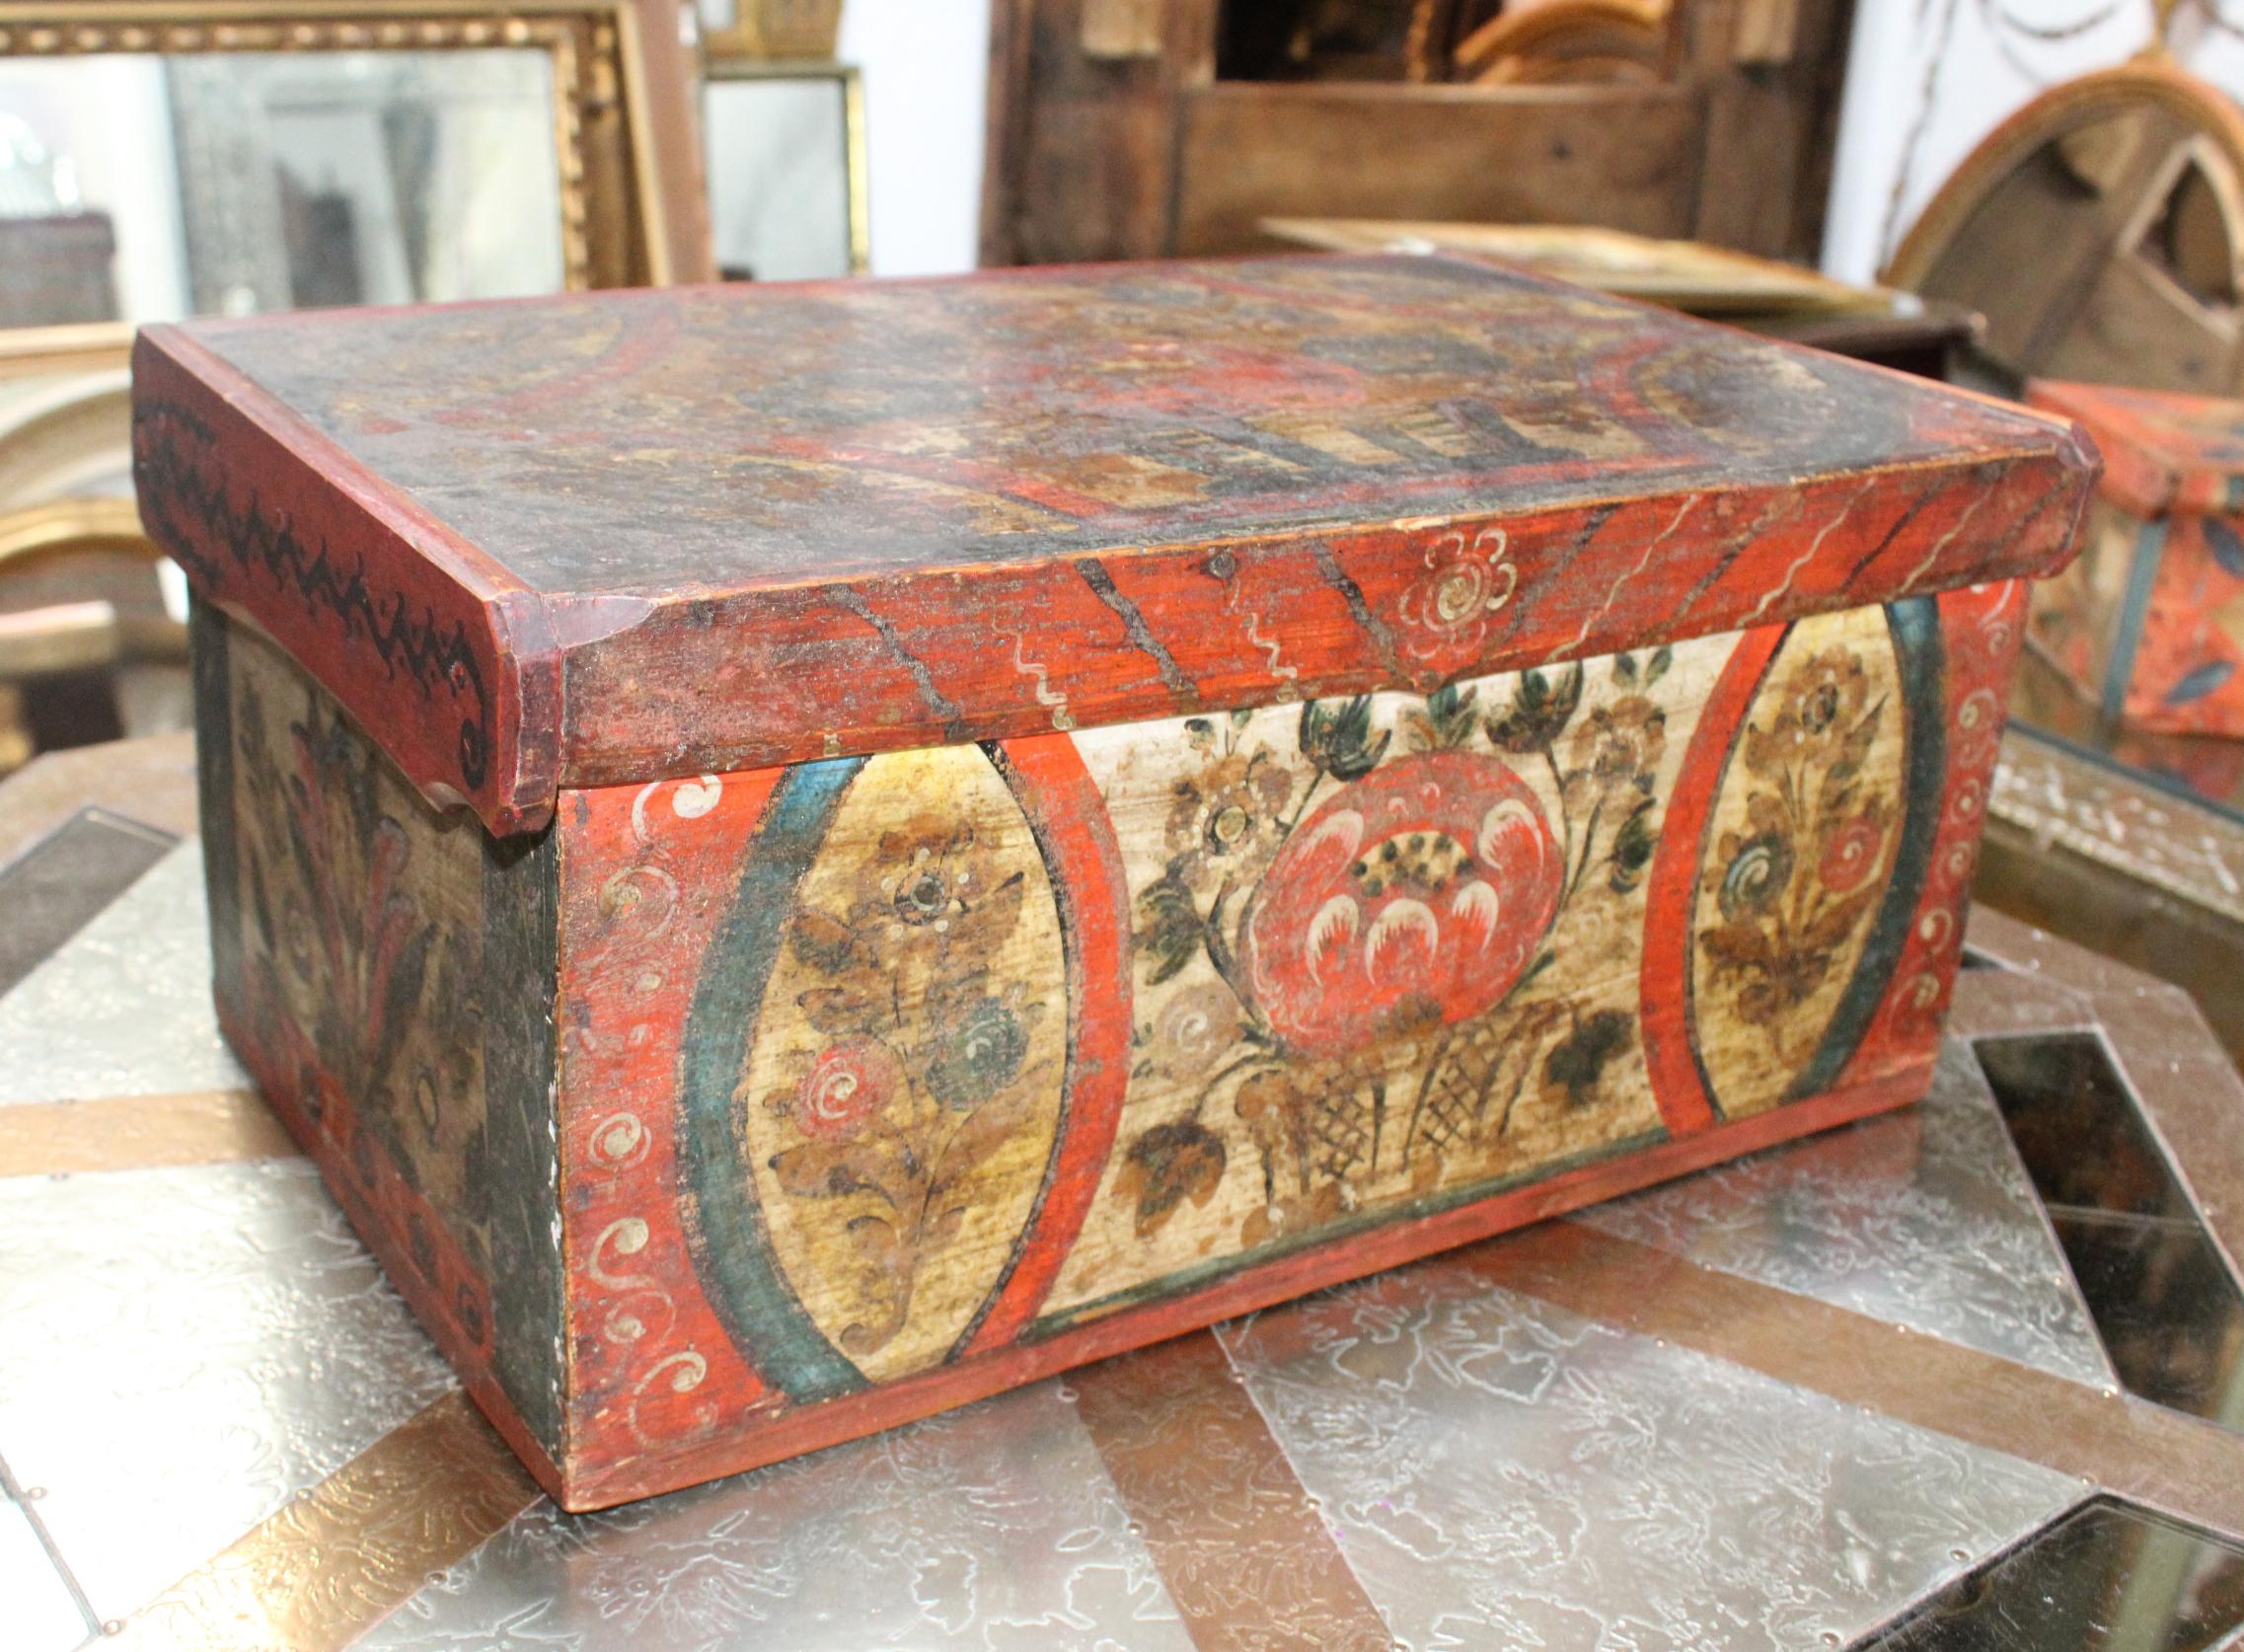 Hand-Painted 18th Century Swiss Hand Painted Wooden Box with Vegetable Motifs